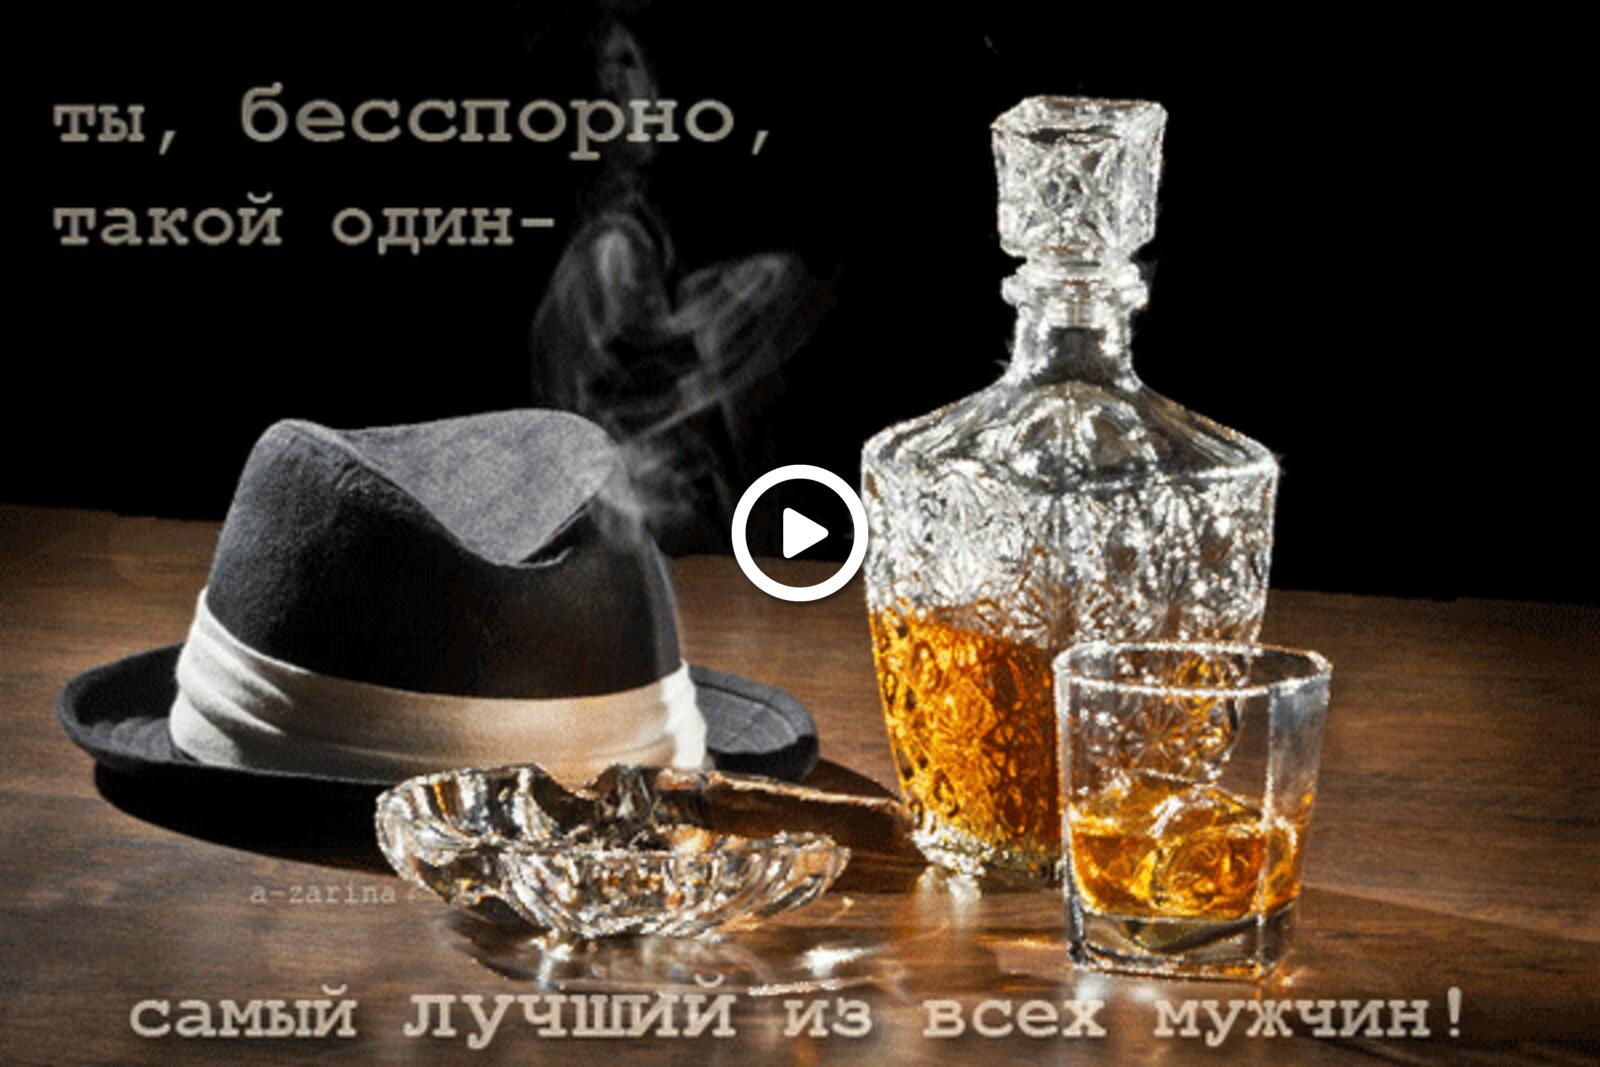 A postcard on the subject of hat whiskey cognac for free